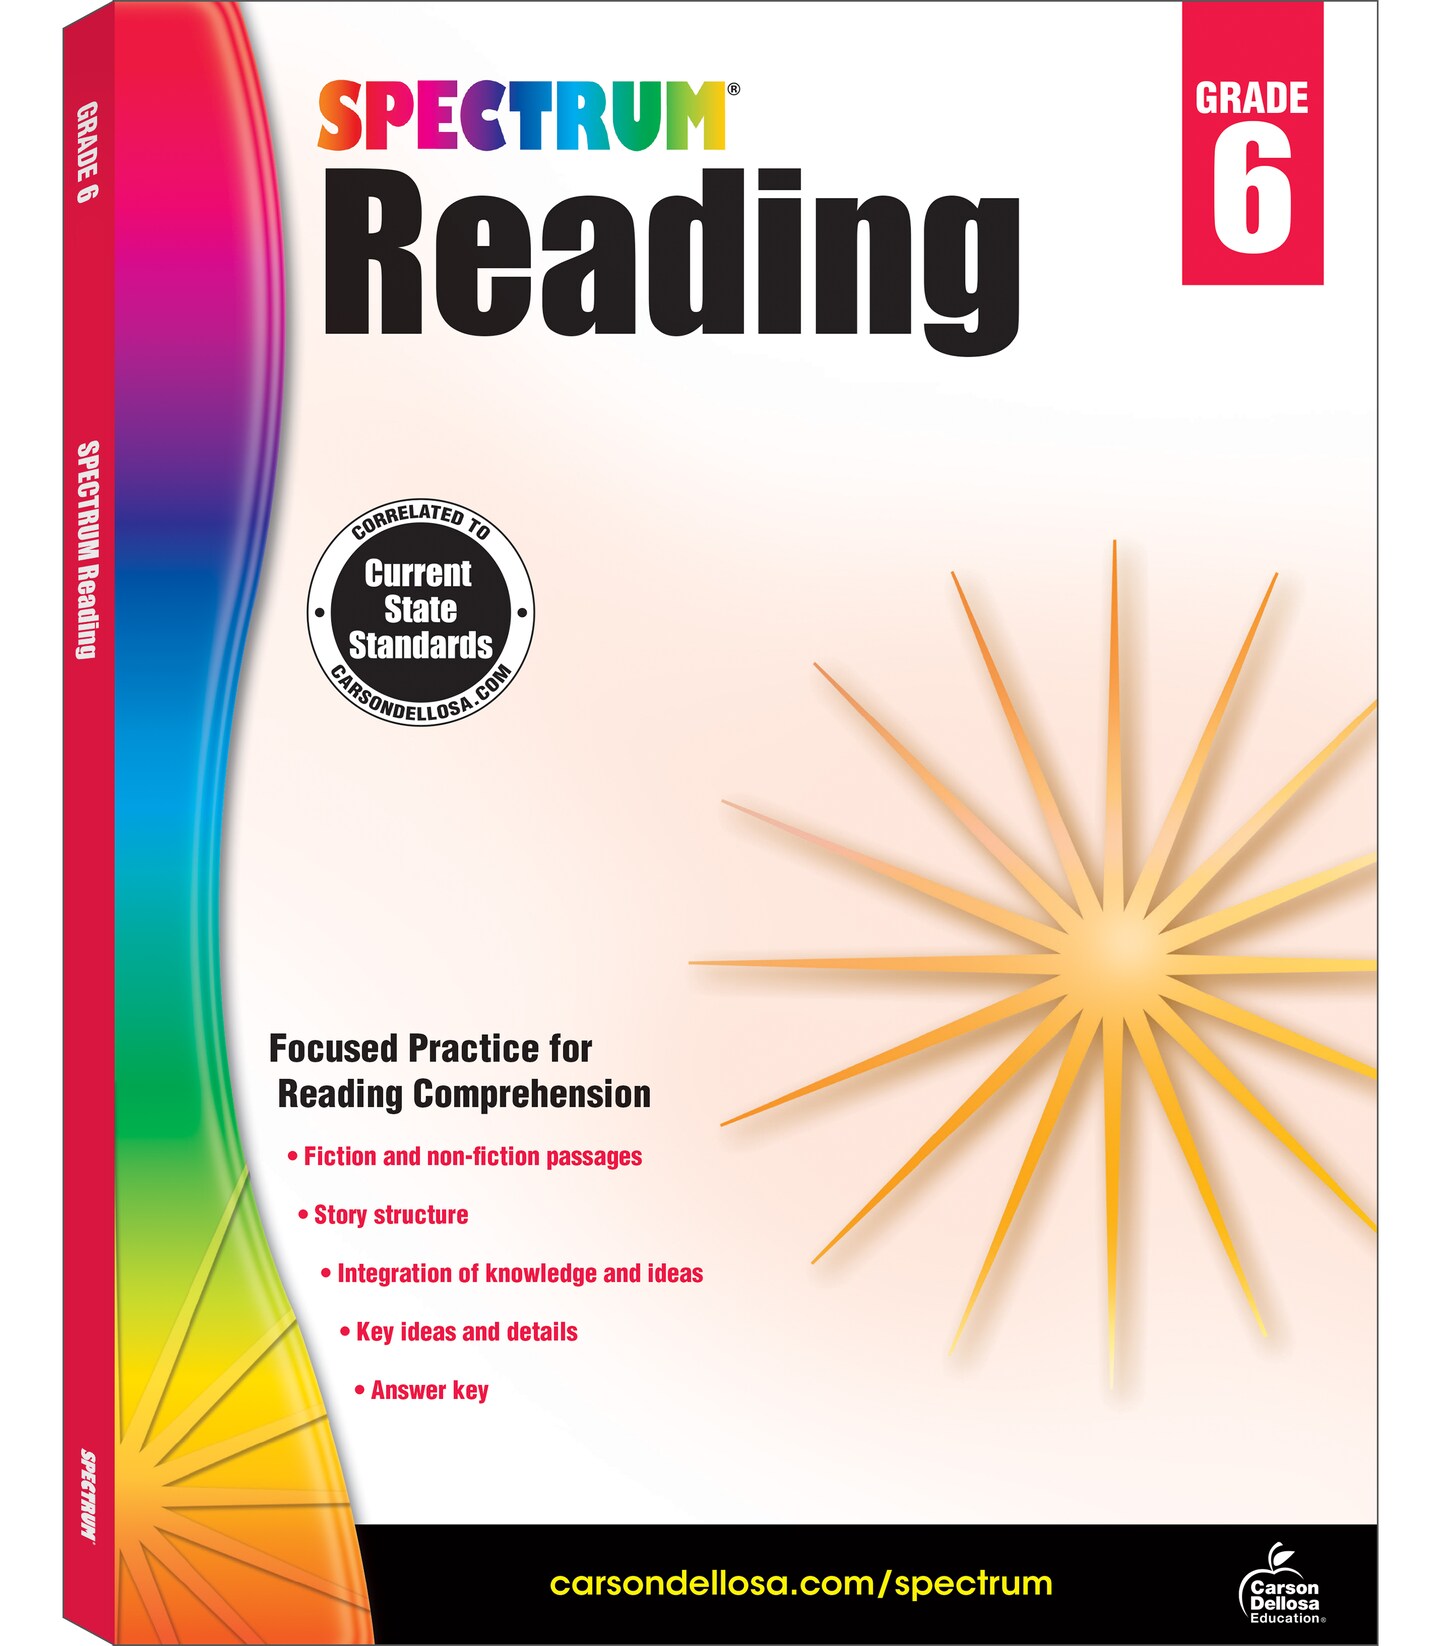 Spectrum Reading Comprehension Grade 6, Ages 11 to 12, 6th Grade Reading Comprehension Workbooks, Nonfiction and Fiction Passages, Analyzing Story Structure, and Critical Thinking Skills - 174 Pages